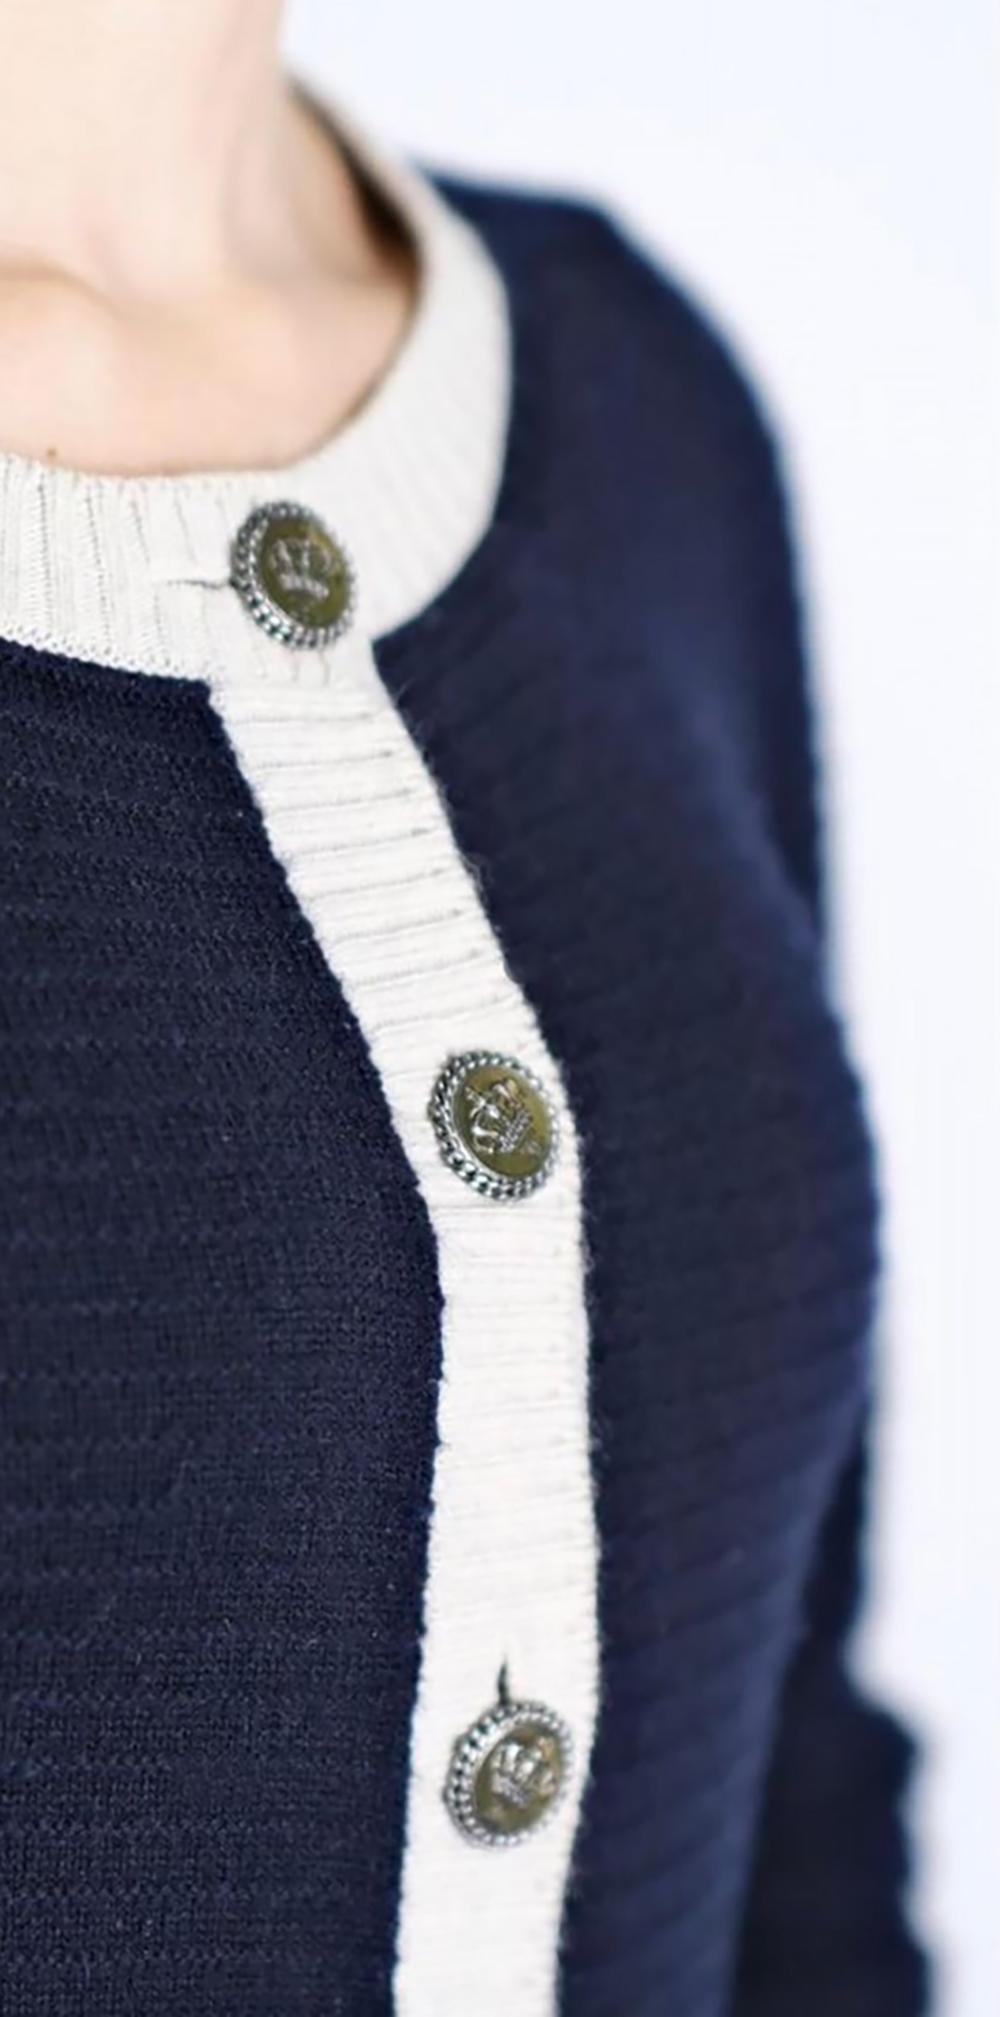 Chanel Paris / London CC Corona Buttons Cardigan In Excellent Condition For Sale In Dubai, AE